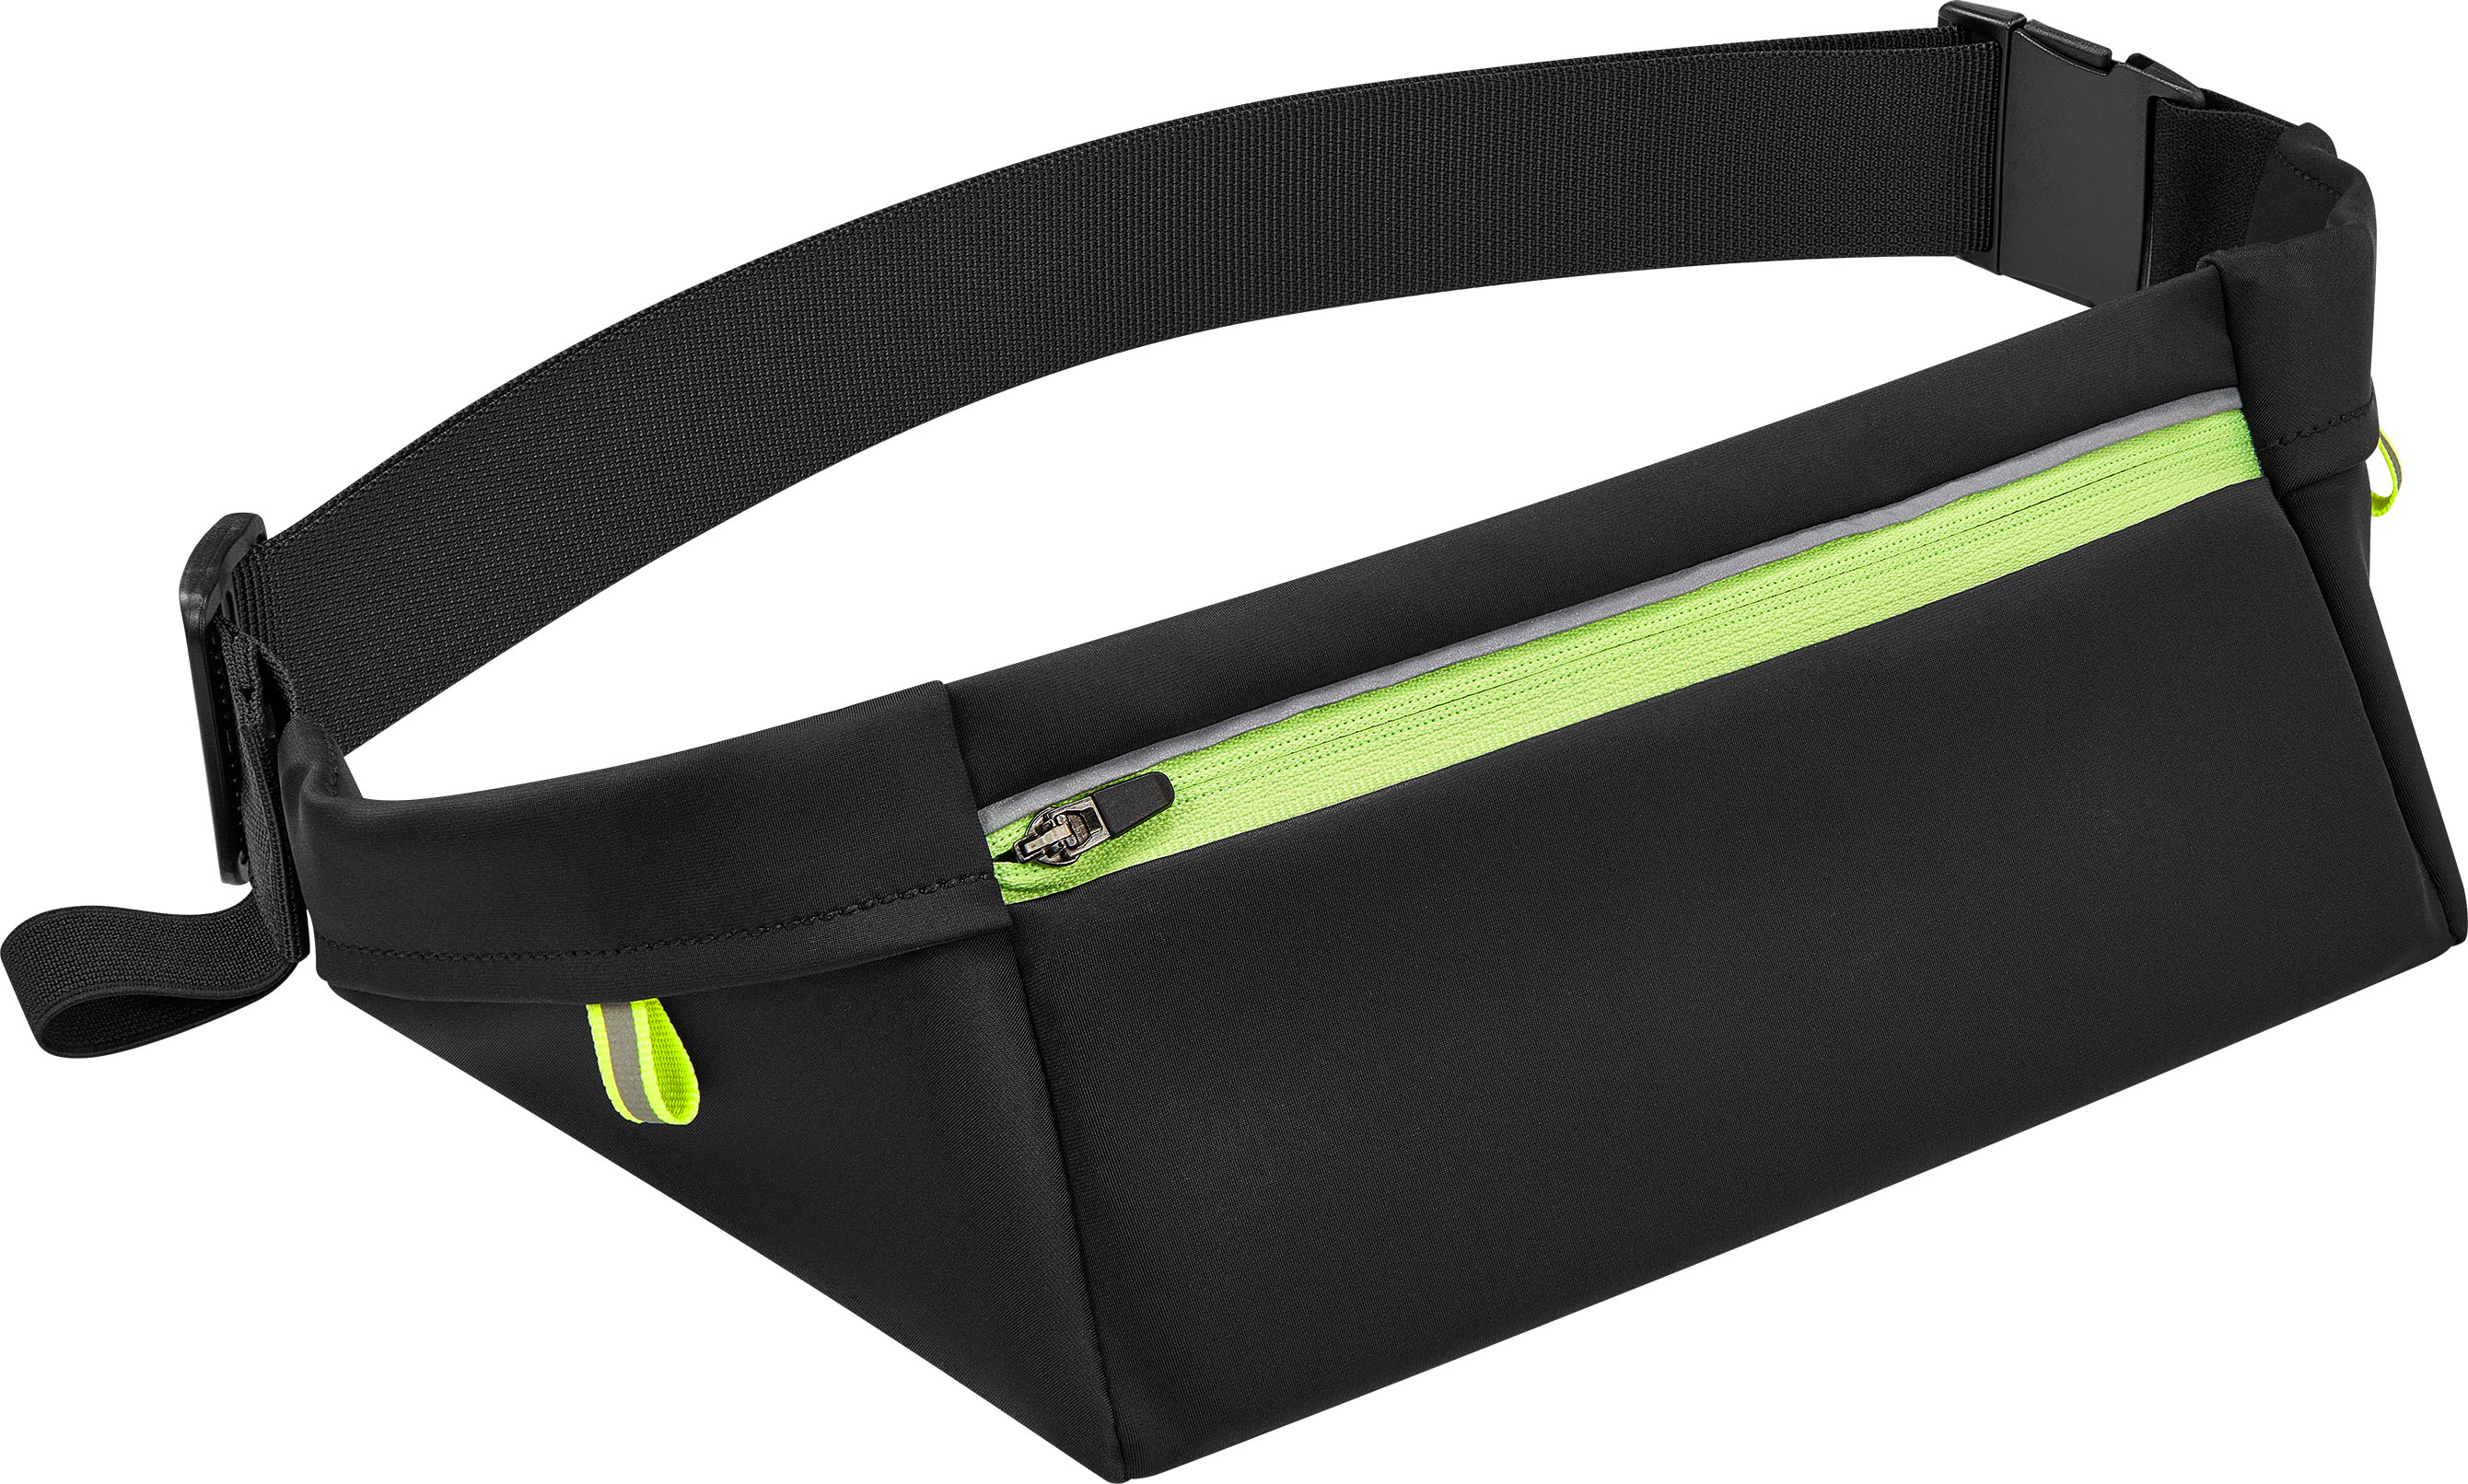 Insignia™ Running Belt for Phone Screens up to 7 Black/Neon Green